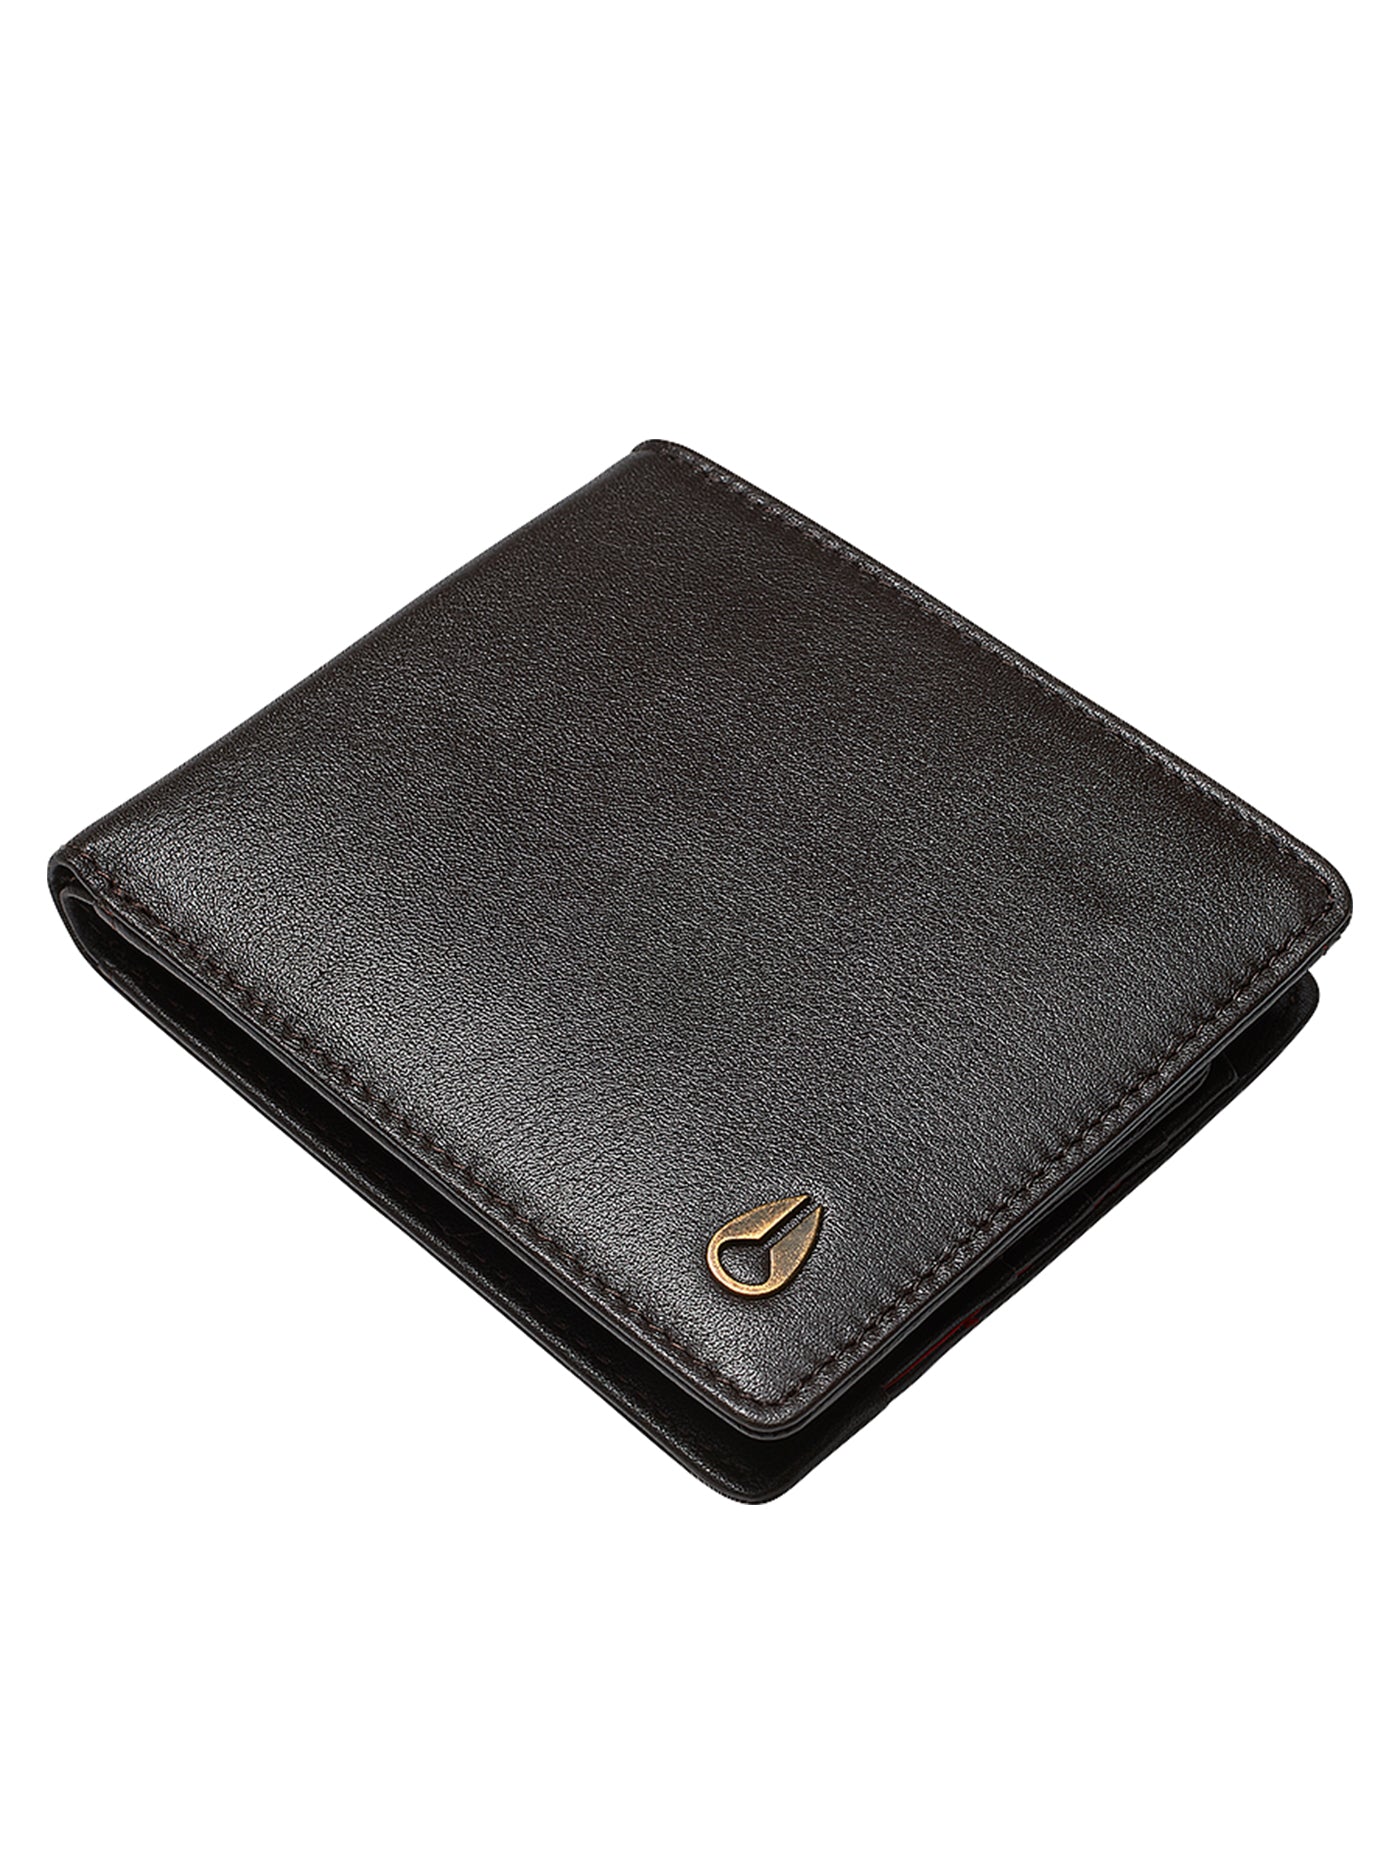 Nixon Pass Leather Coin Wallet